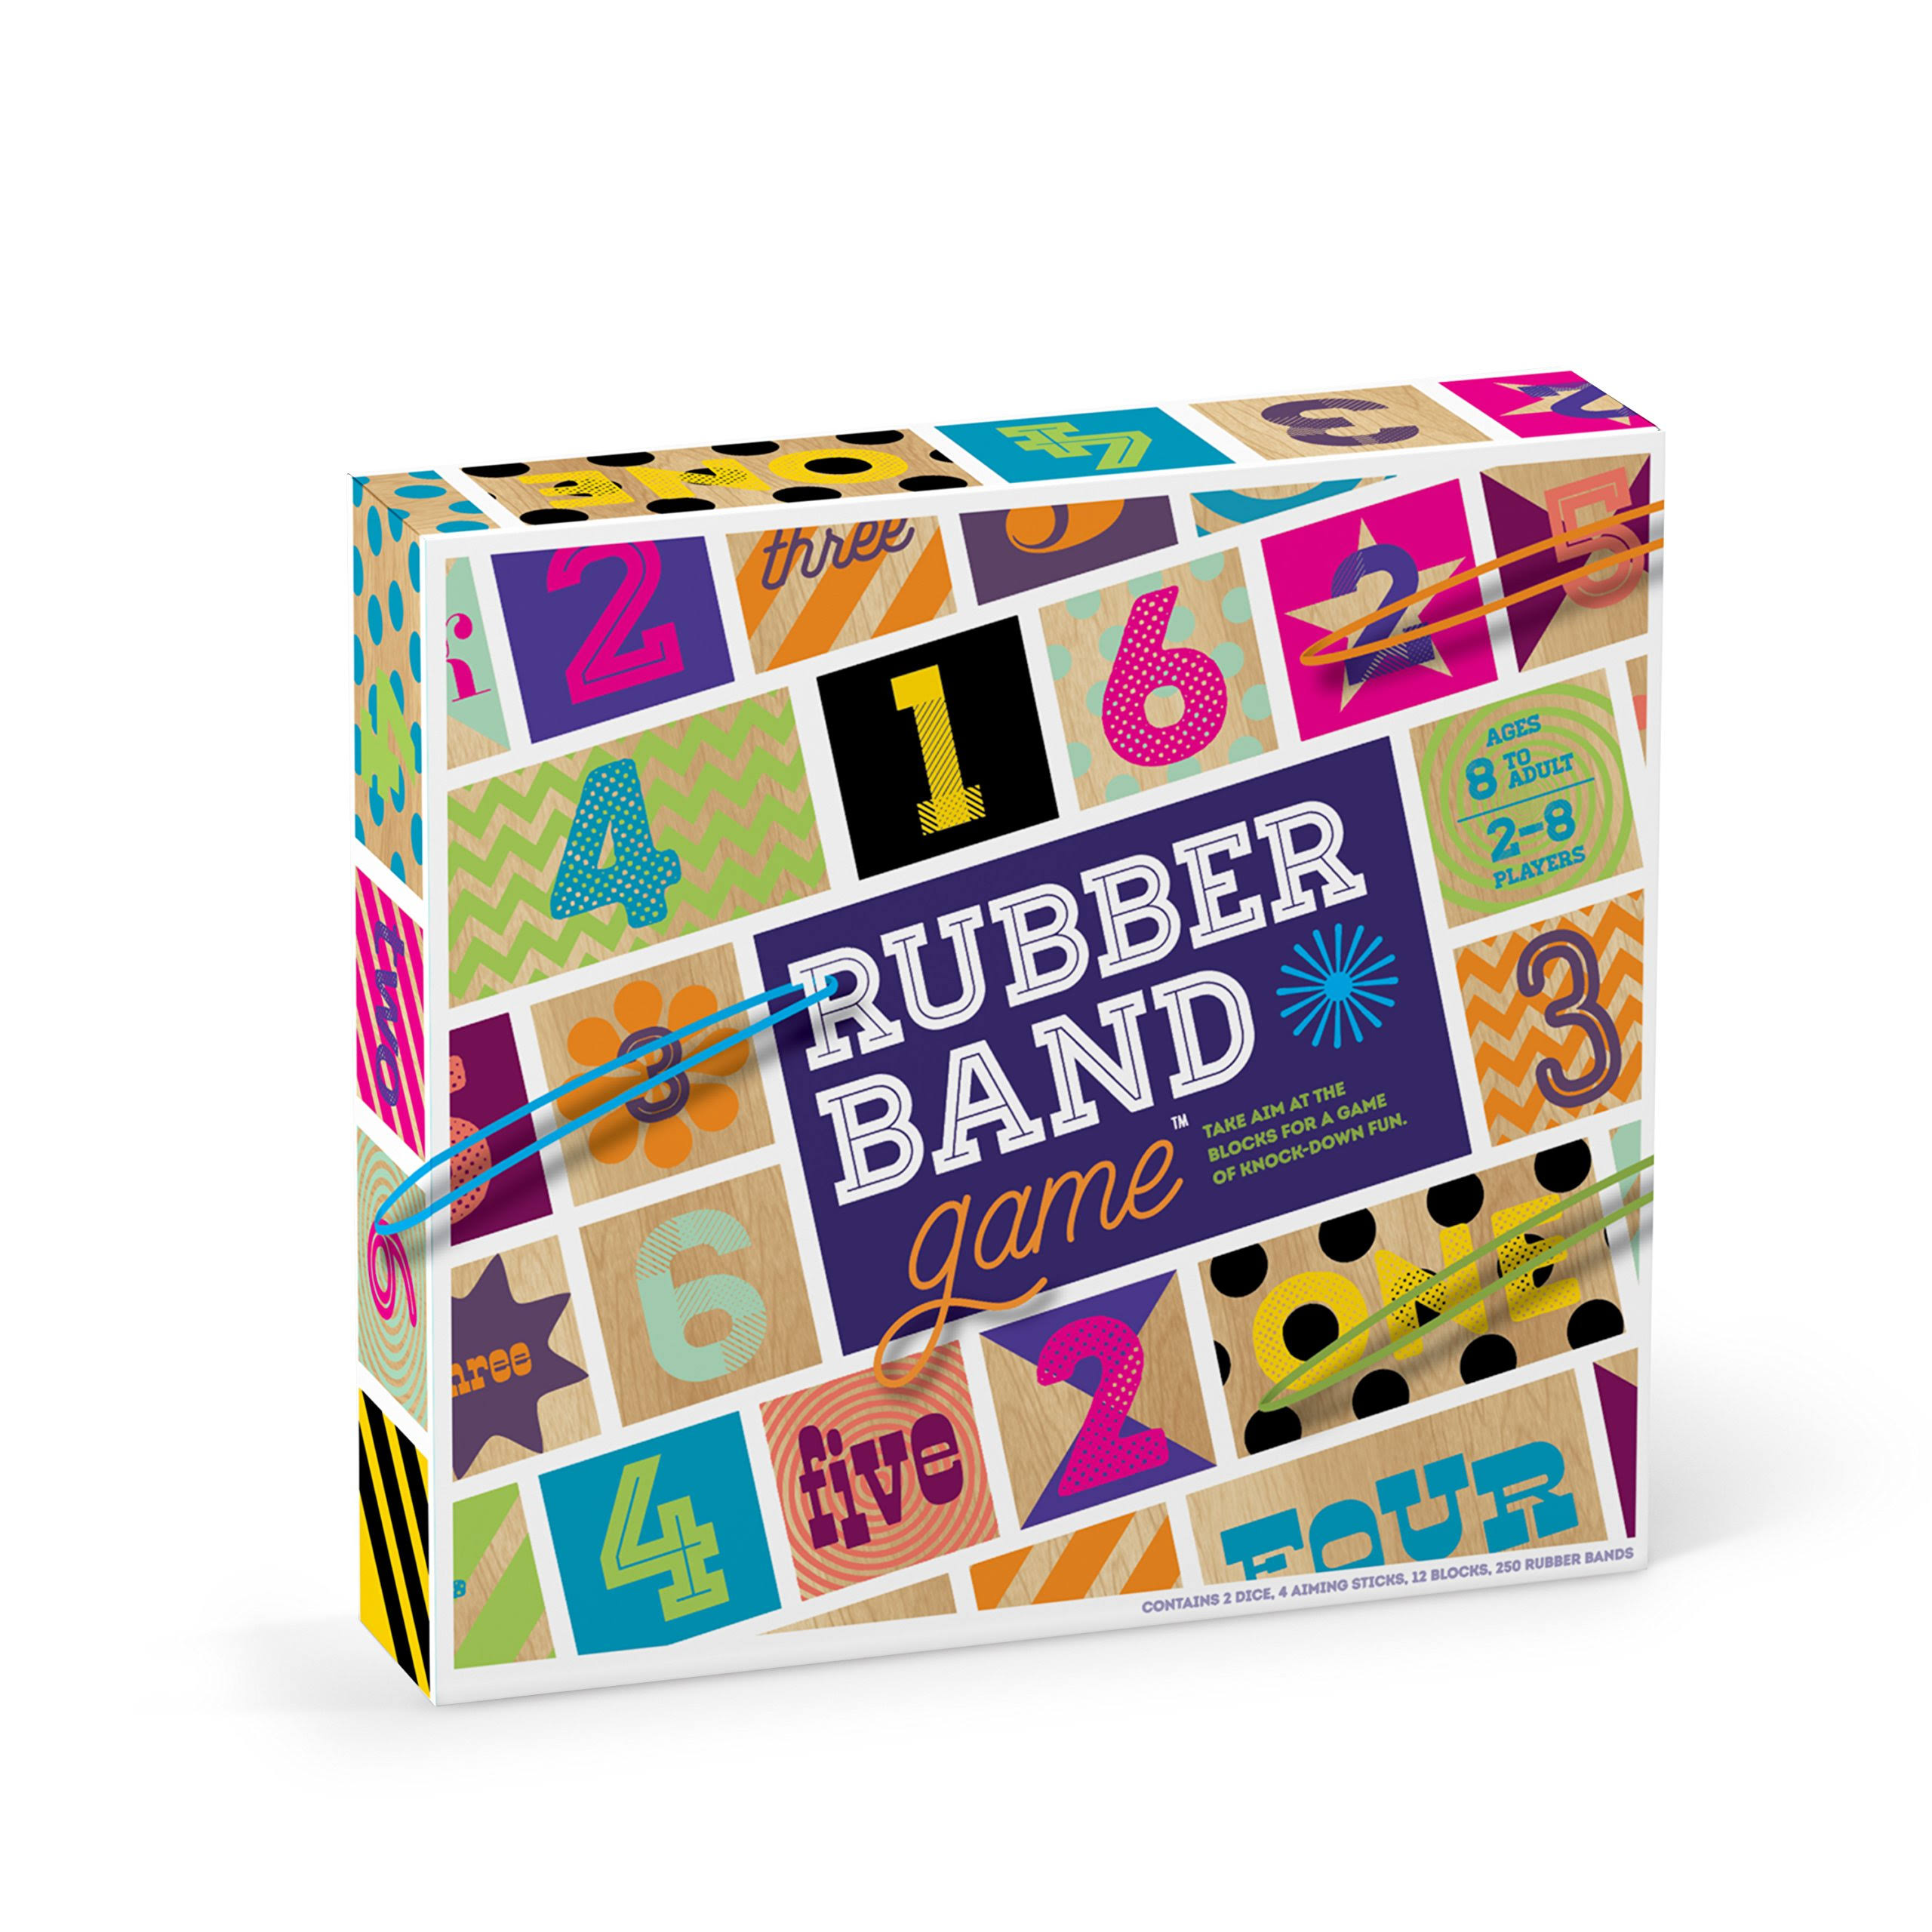 Rubber Band Game